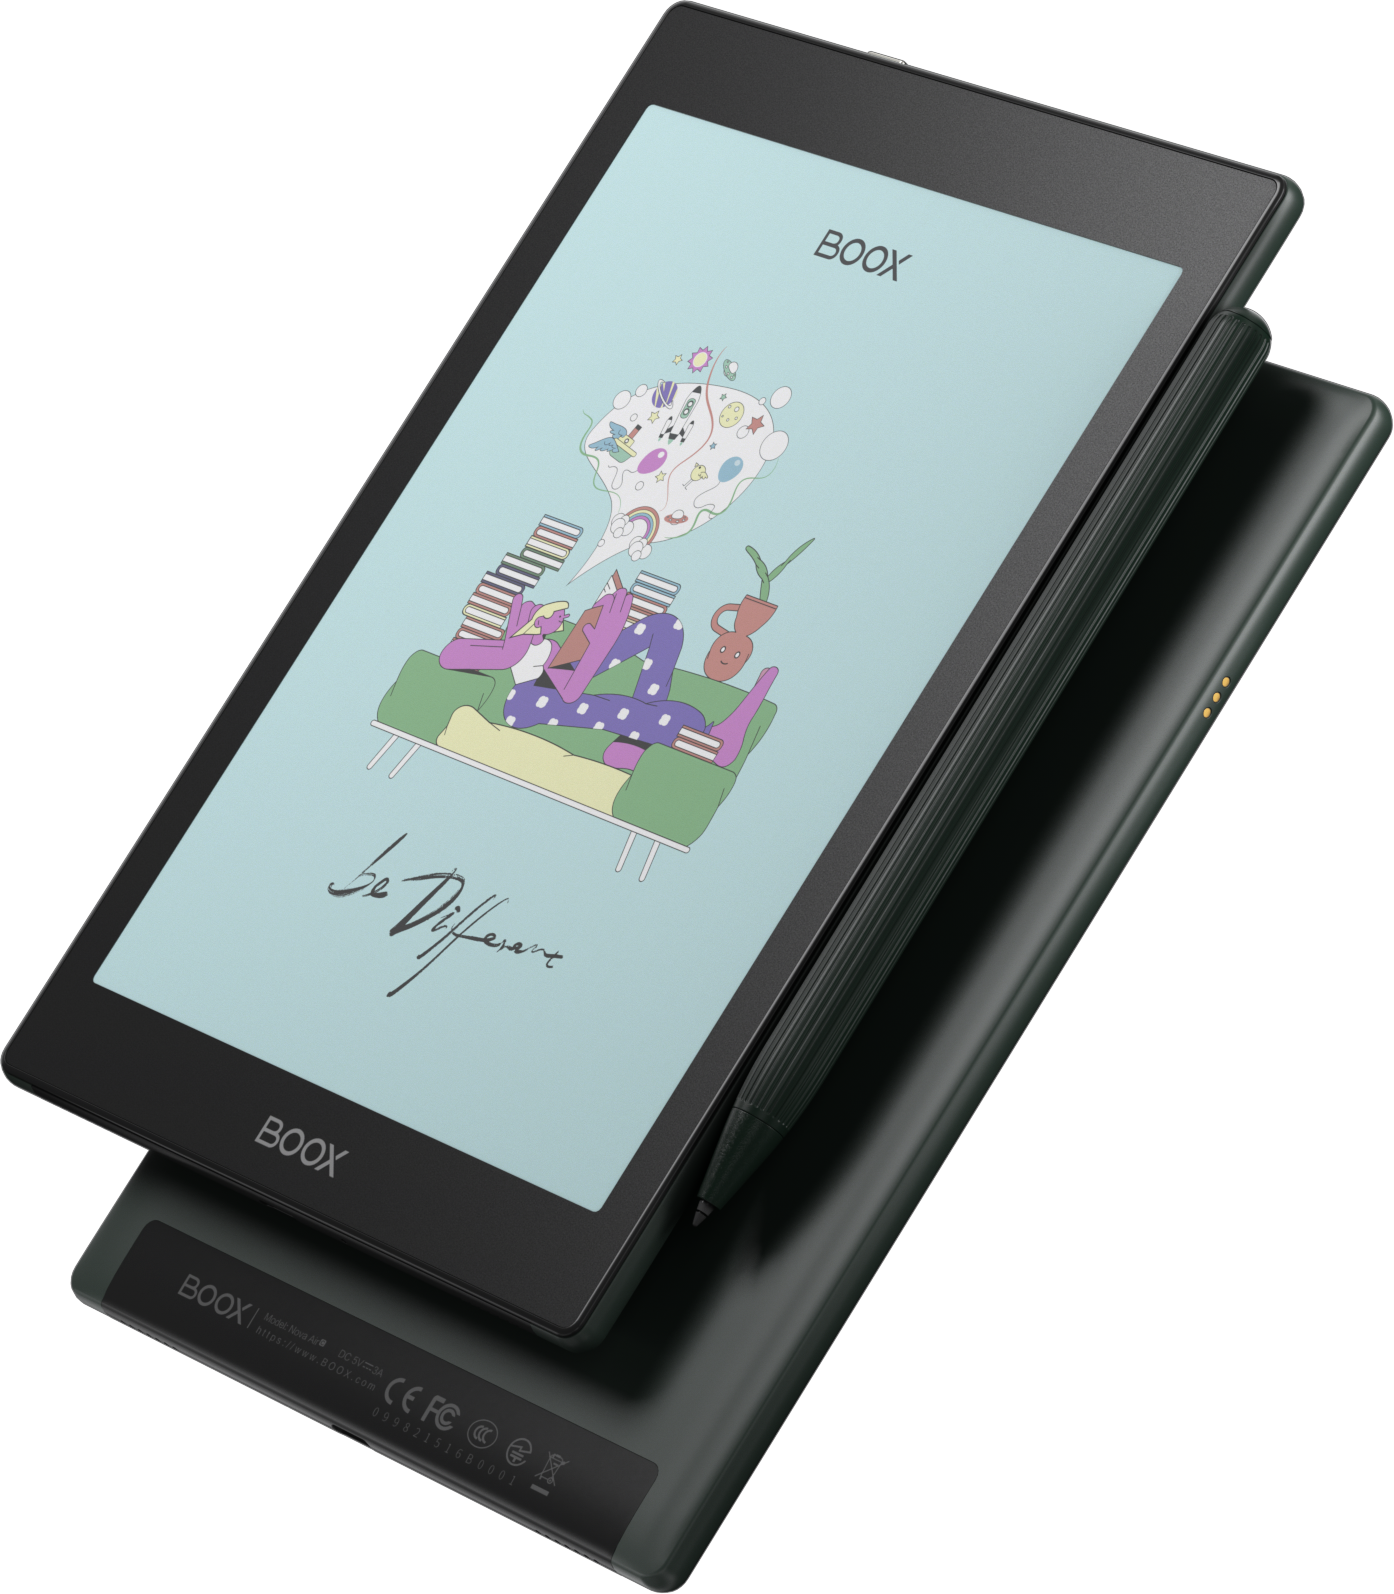 Onyx Boox Nova Air Color with free case and stylus - Good e-Reader